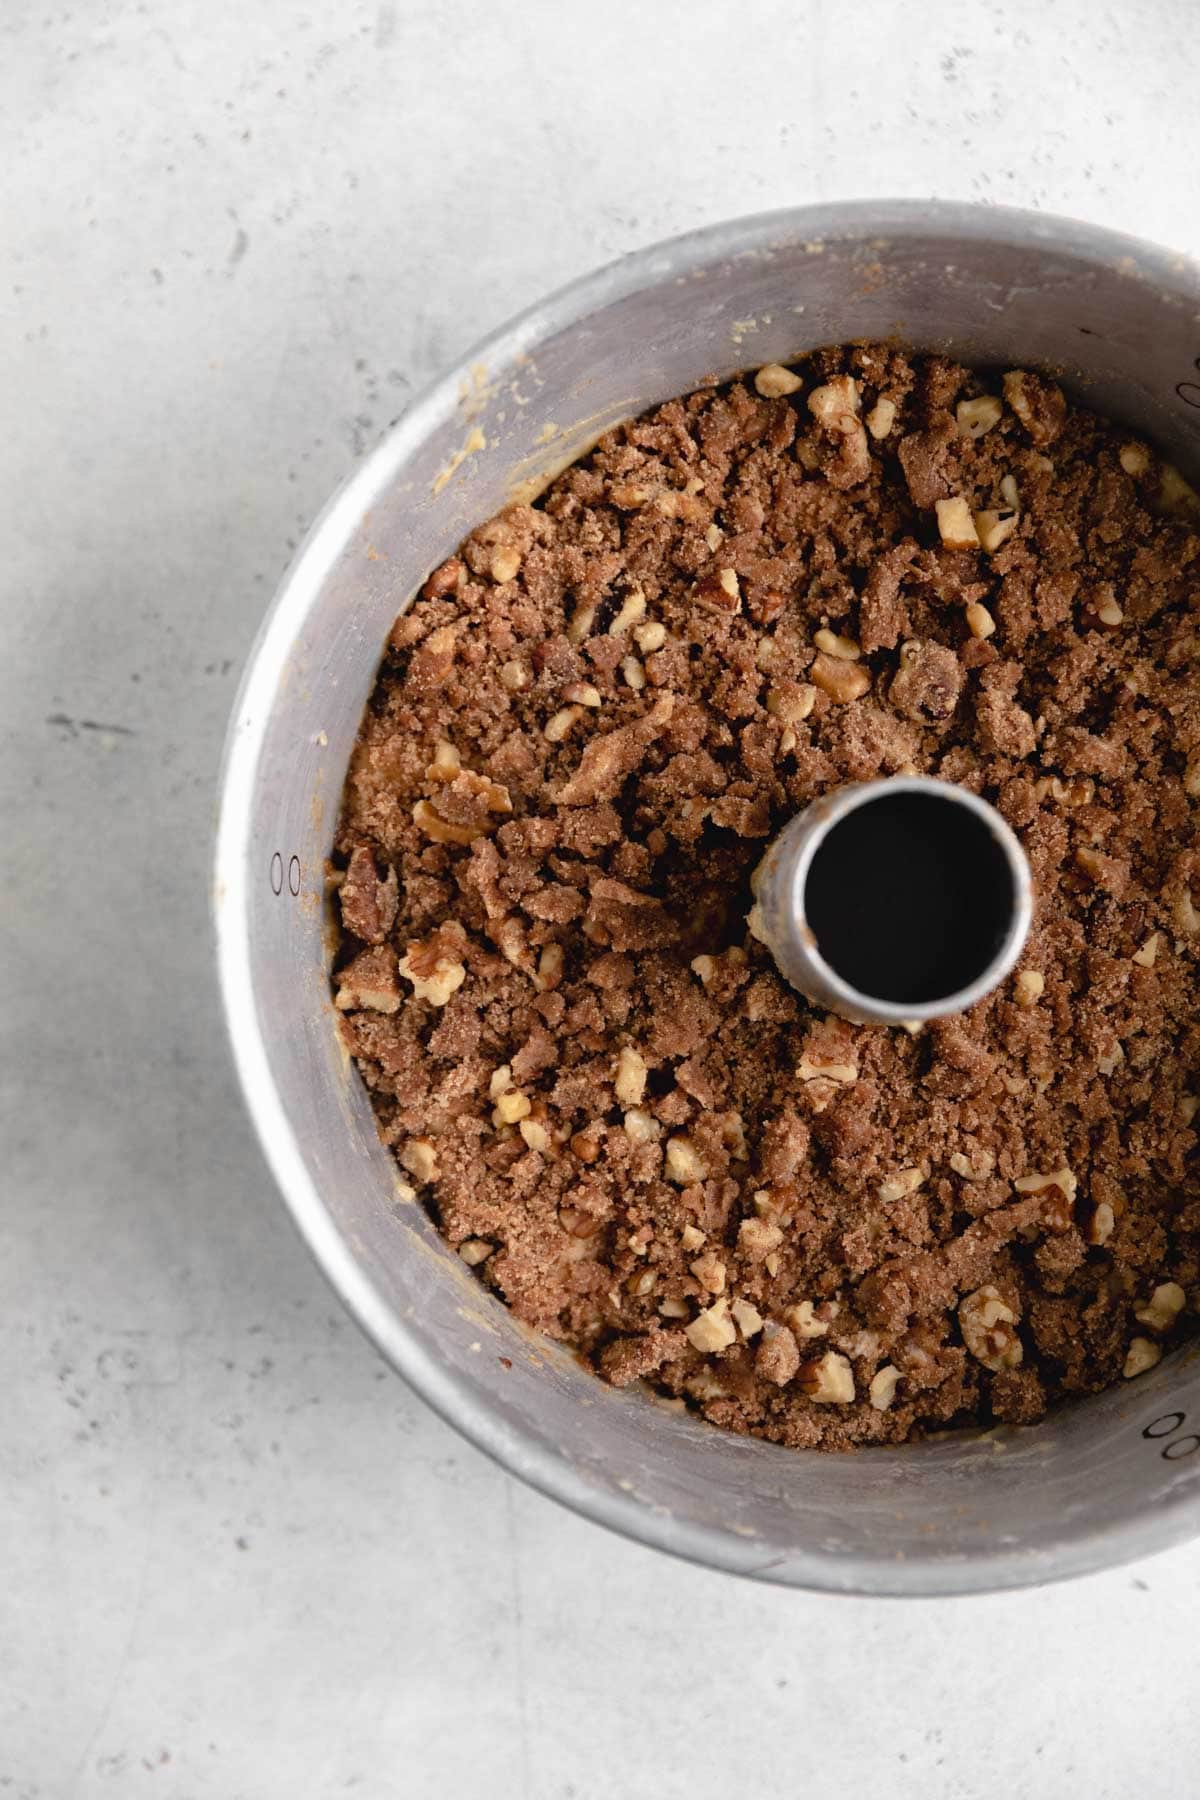 unbaked coffee cake with streusel topping